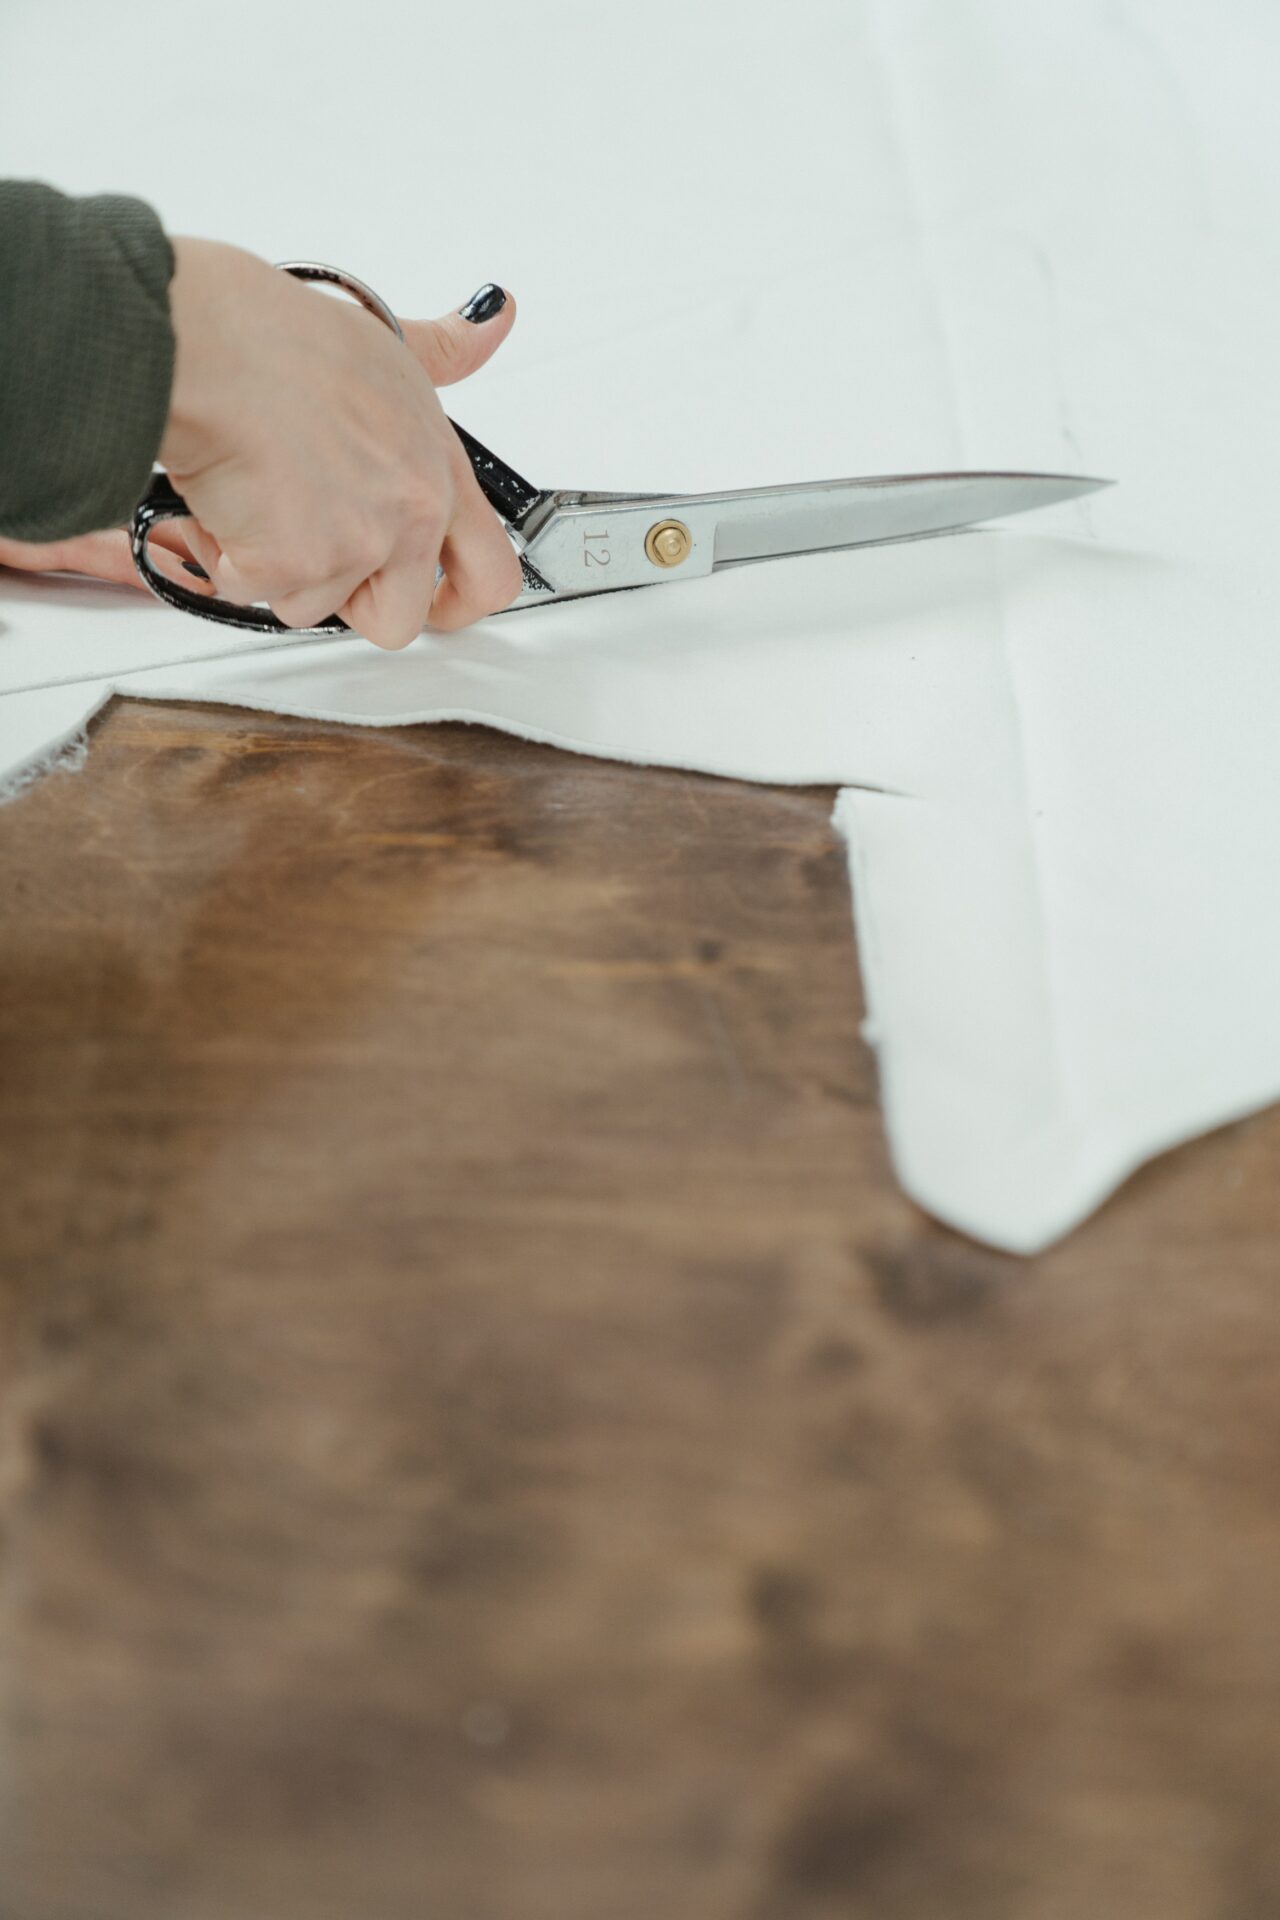 Hand cutting fabric with large scissors (Photo by cottonbro on Pexels)